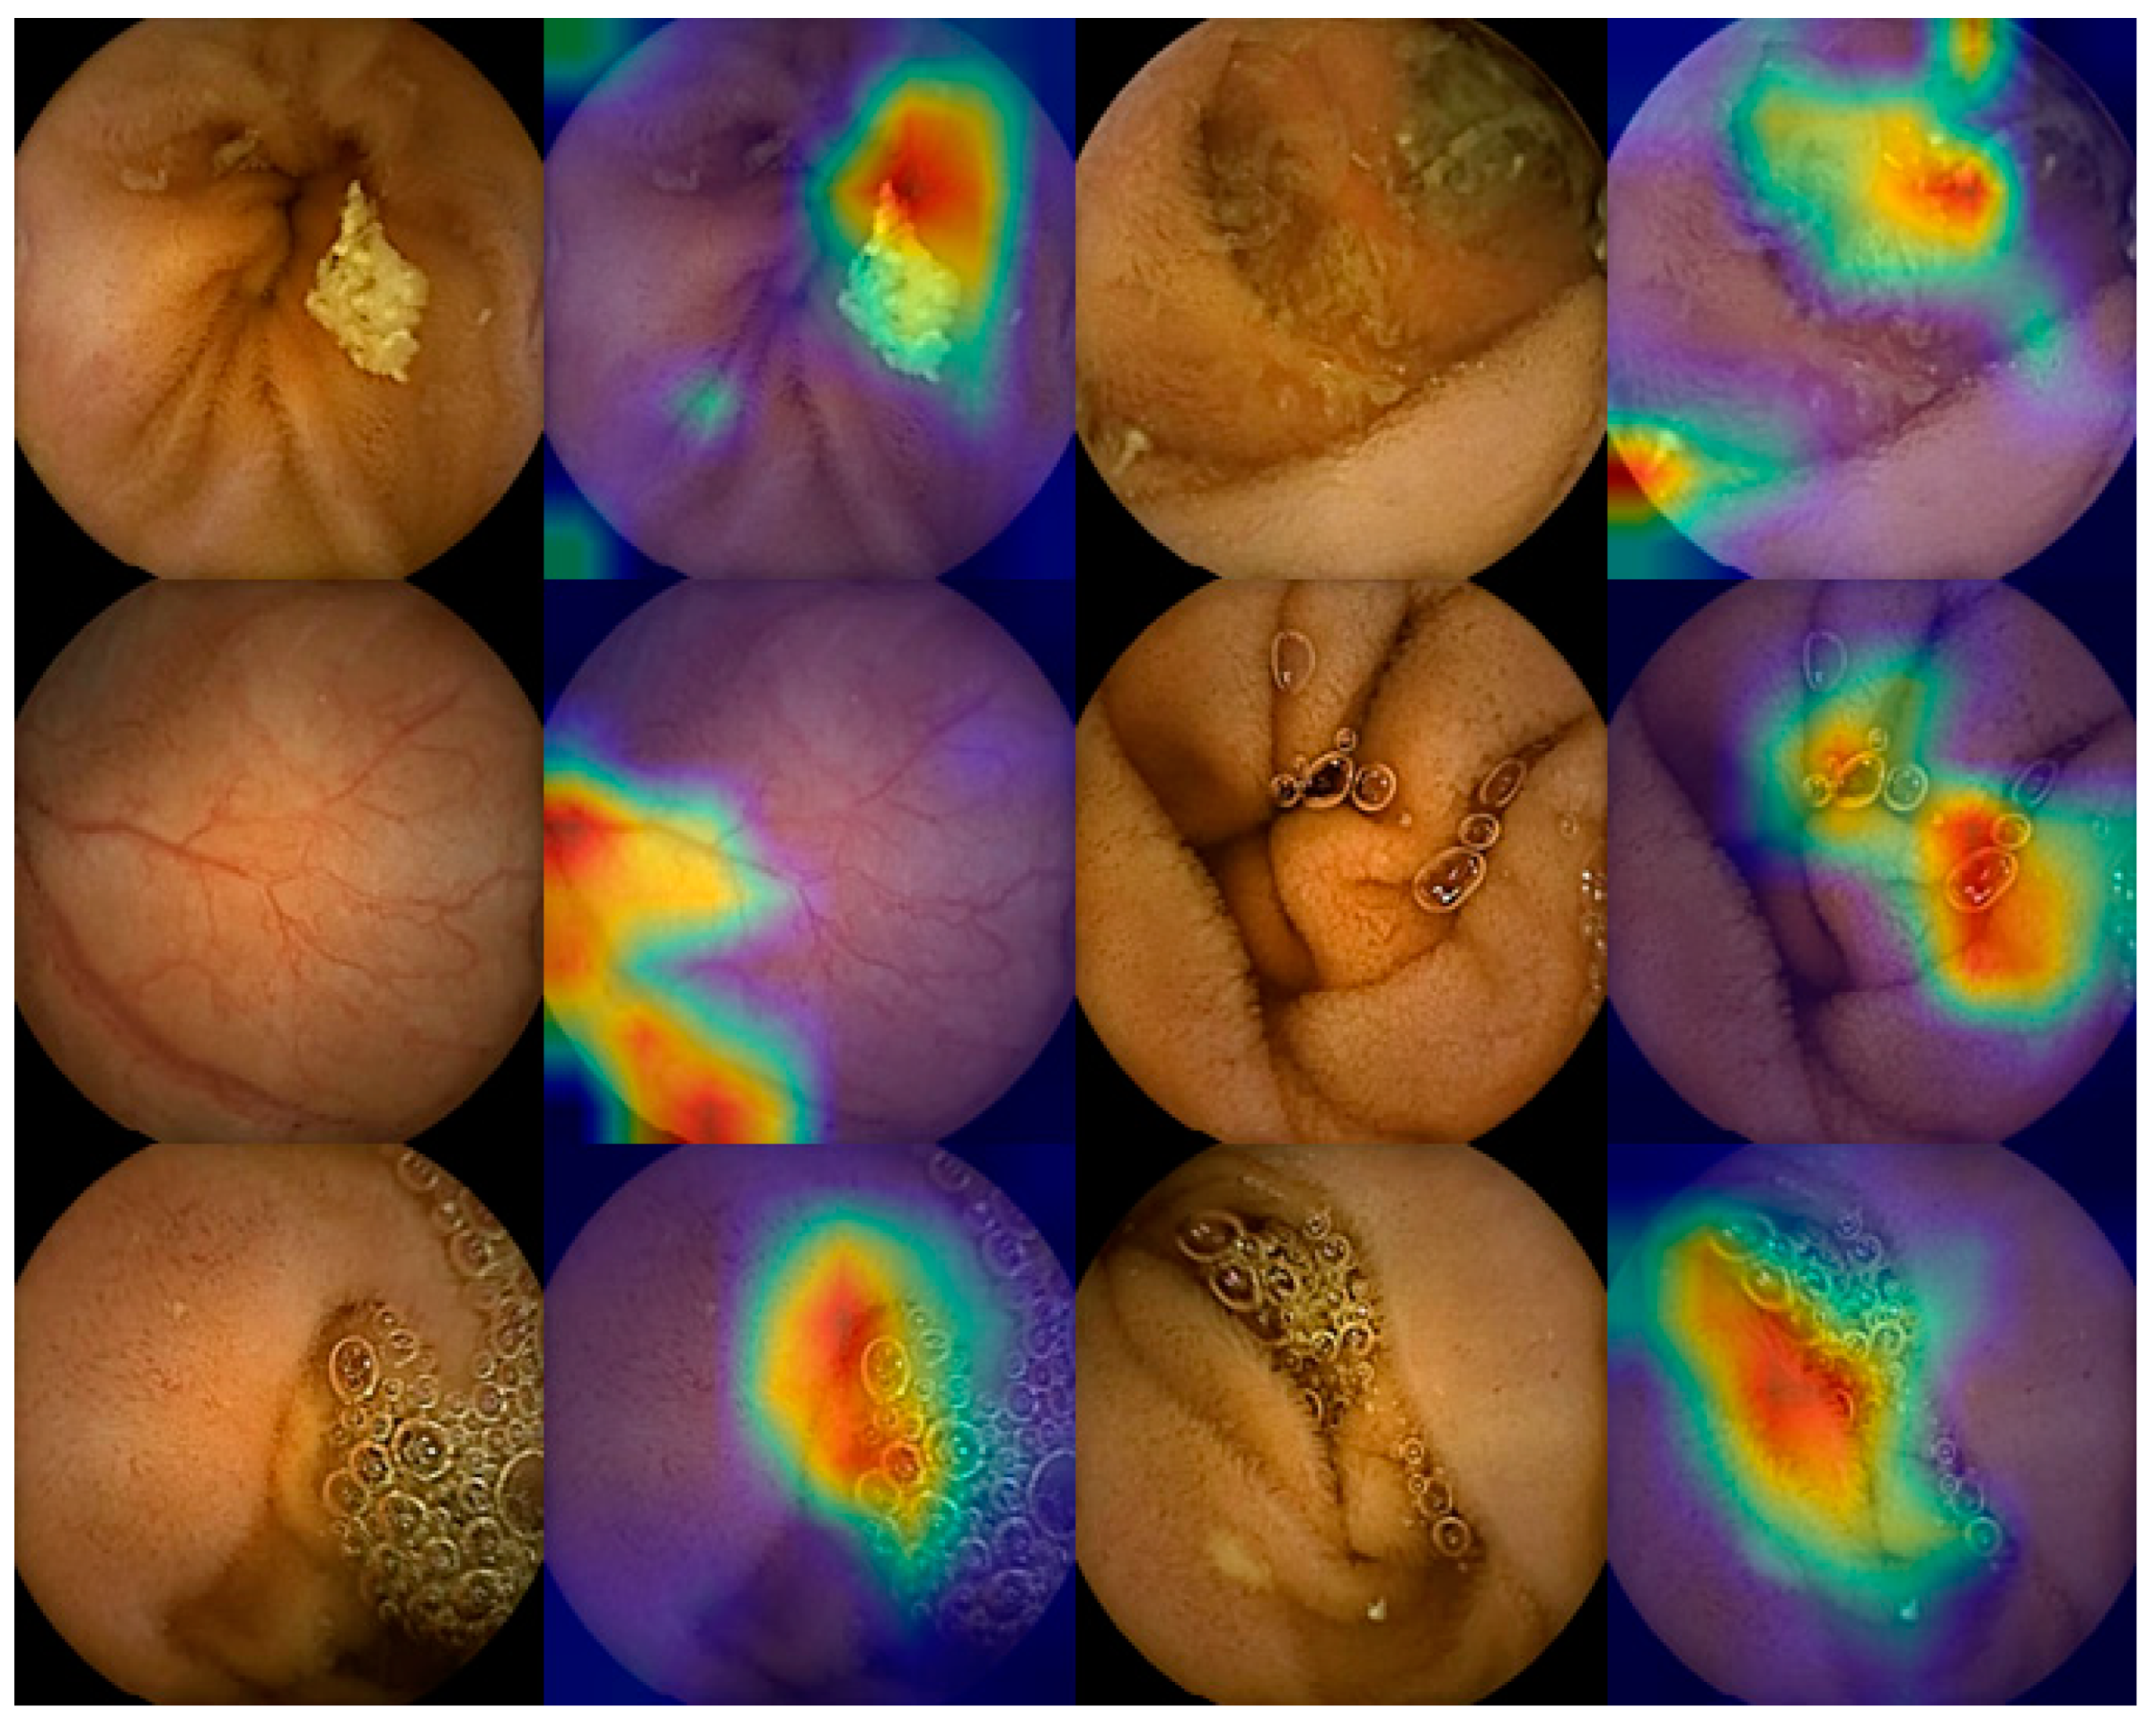 ID: 3526558 ARTIFICIAL INTELLIGENCE AND COLON CAPSULE ENDOSCOPY: AUTOMATIC  DETECTION OF COLONIC PROTUBERANT LESIONS USING A CONVOLUTIONAL NEURAL  NETWORK - Gastrointestinal Endoscopy